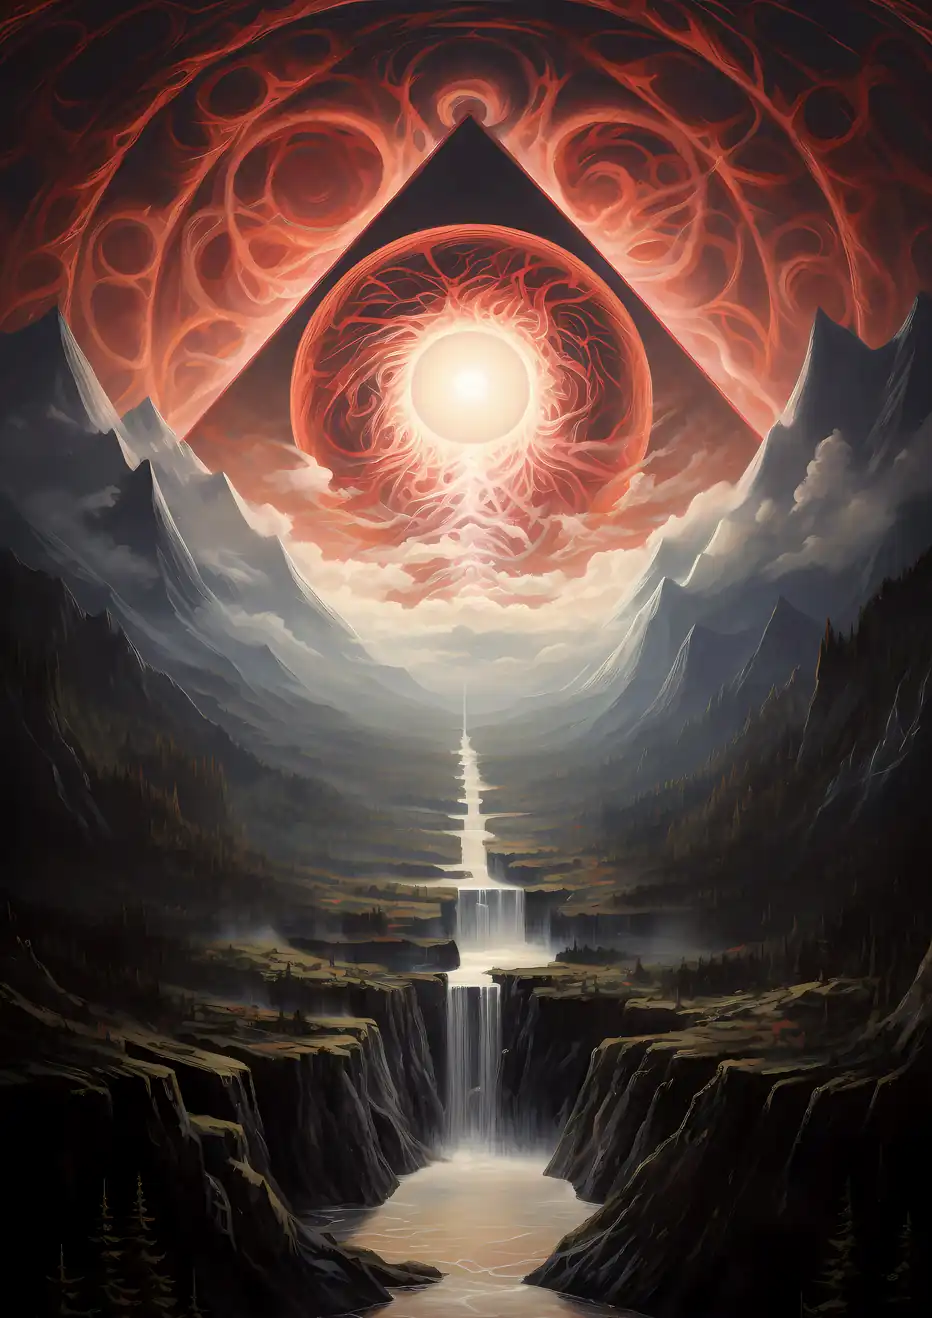 "Eye of the Cosmic Nexus" - A panoramic view of lush landscapes with waterfalls, mountains, and a radiant orb.